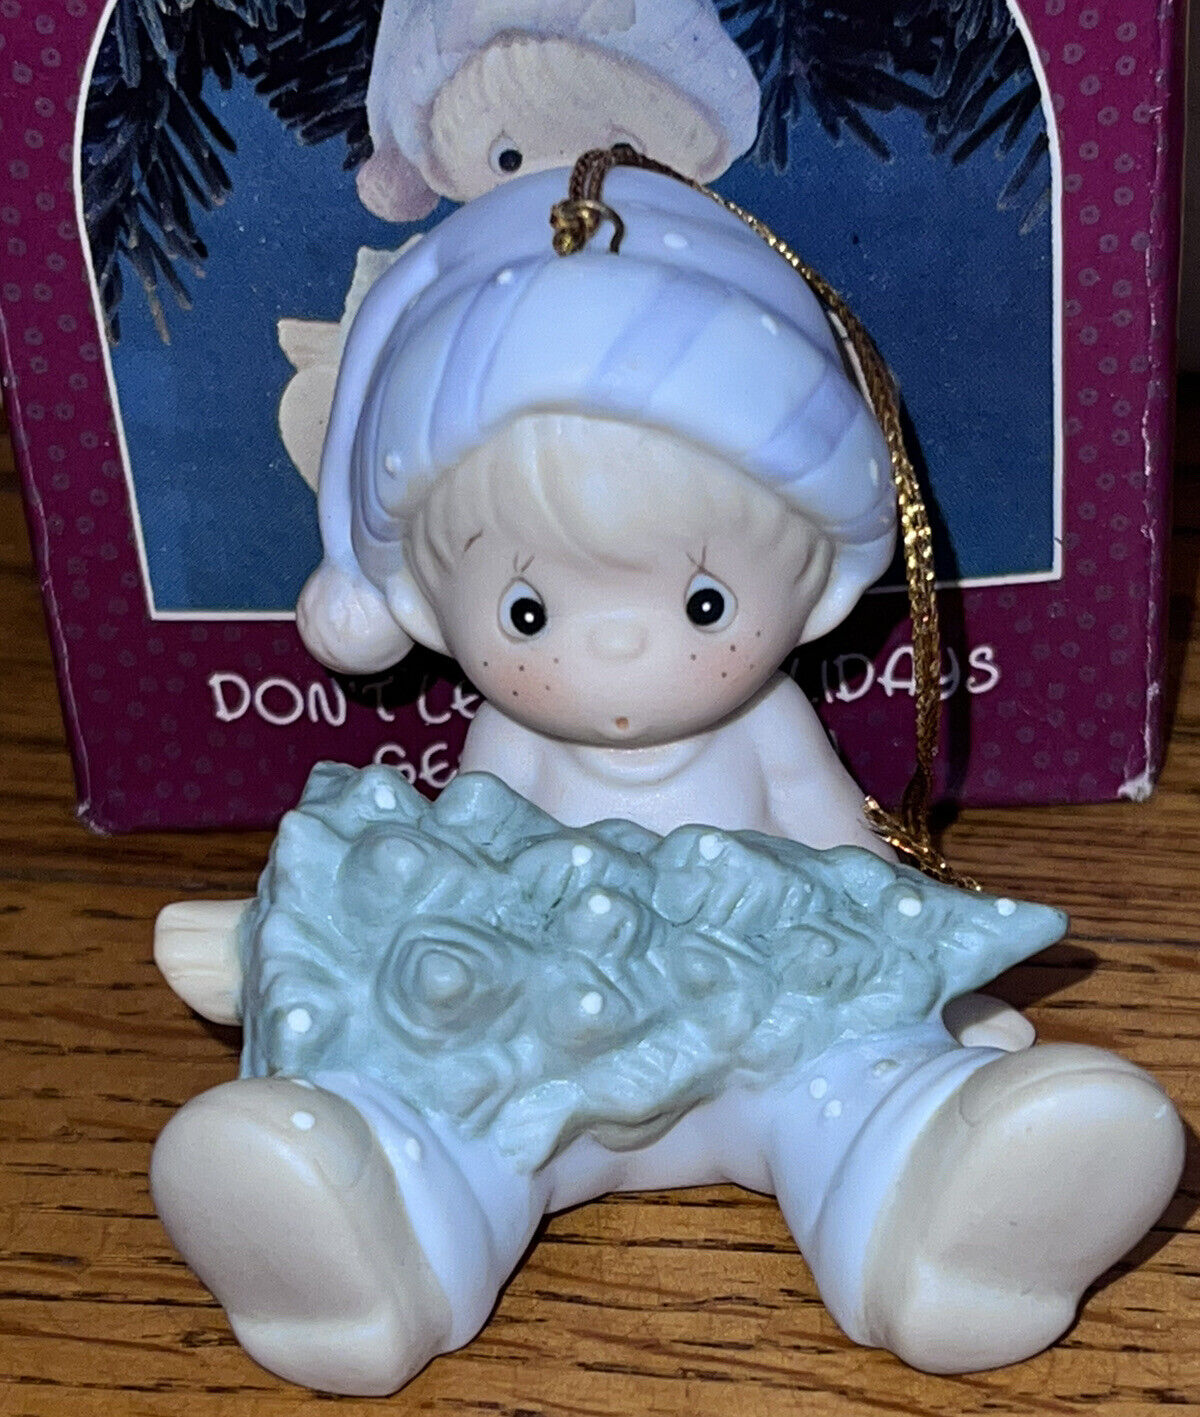 Buy 2 Get 1 Free Precious Moments-“Don’t Let the Holidays Get You Down”Ornament